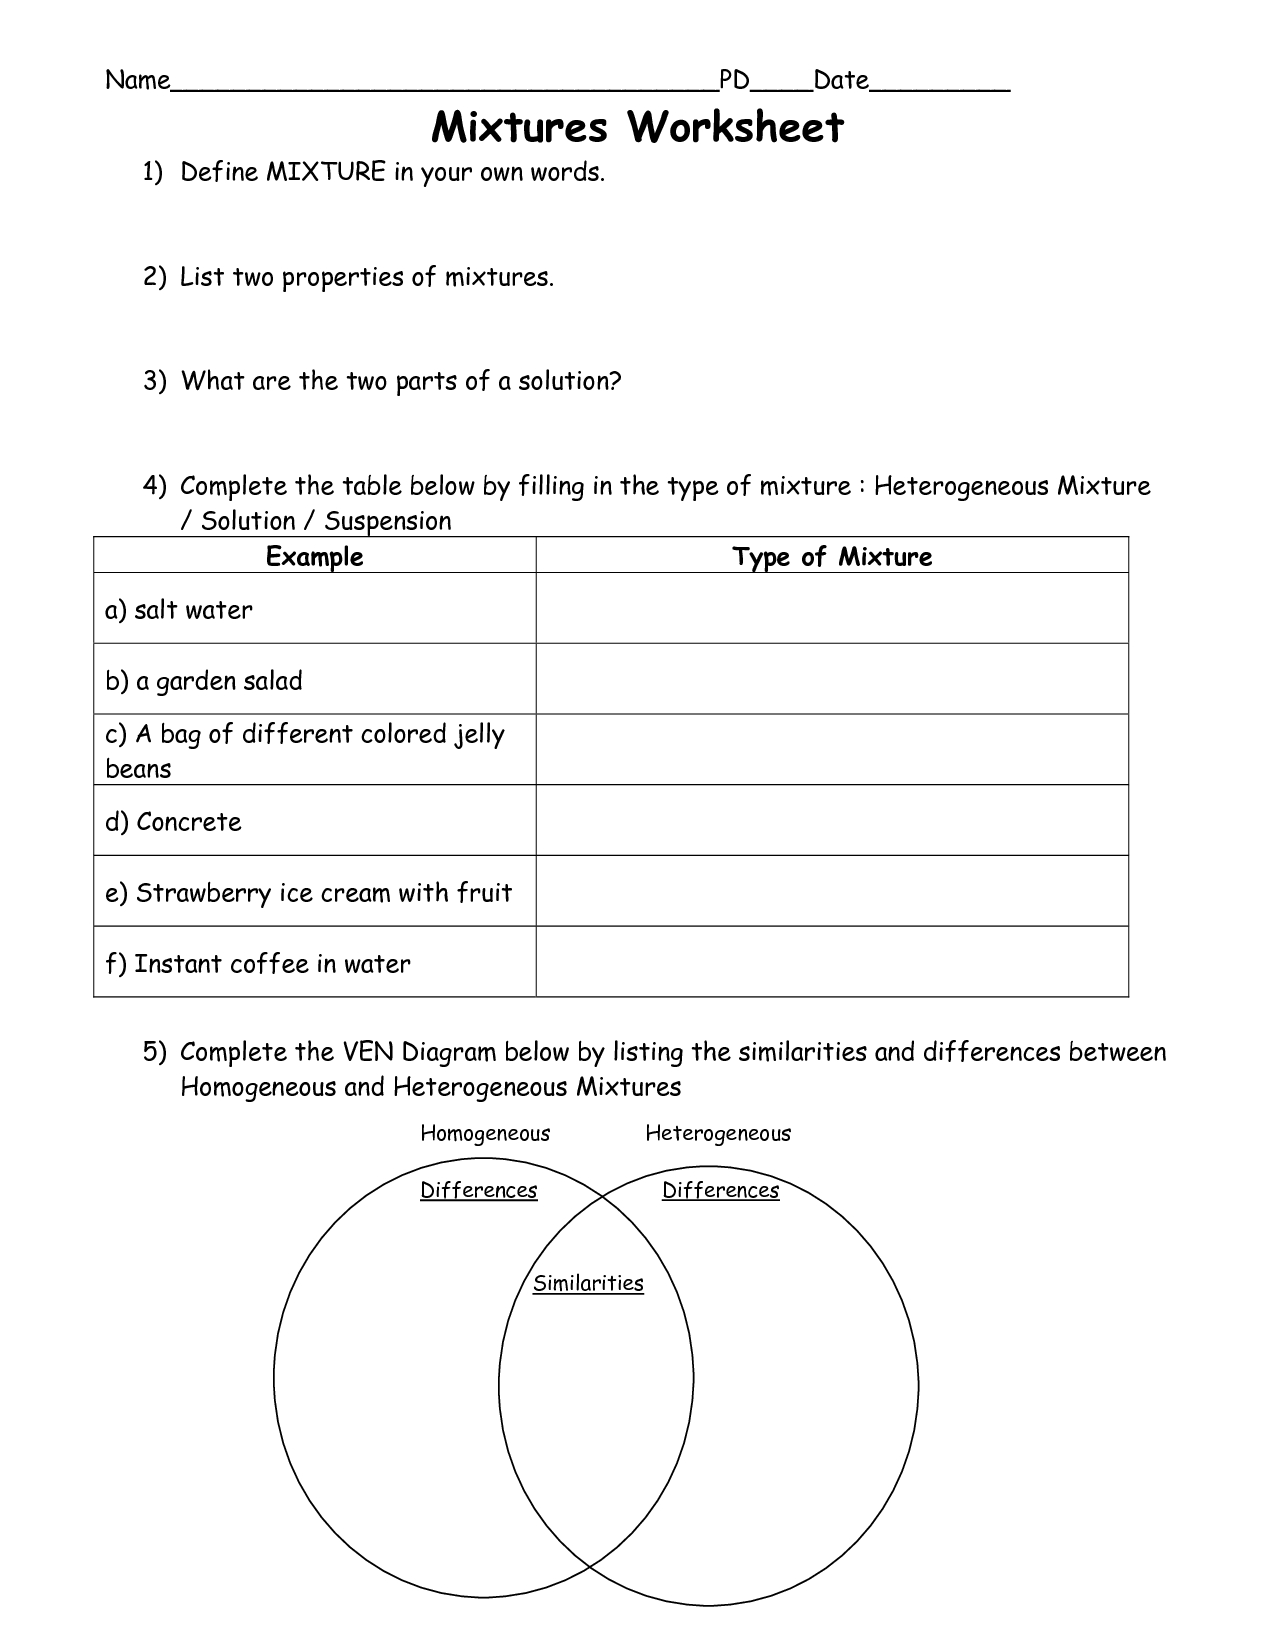 Elements Of Art Worksheets | Scope Of Work Template | Art Handout | Free Printable Worksheets On Mixtures And Solutions